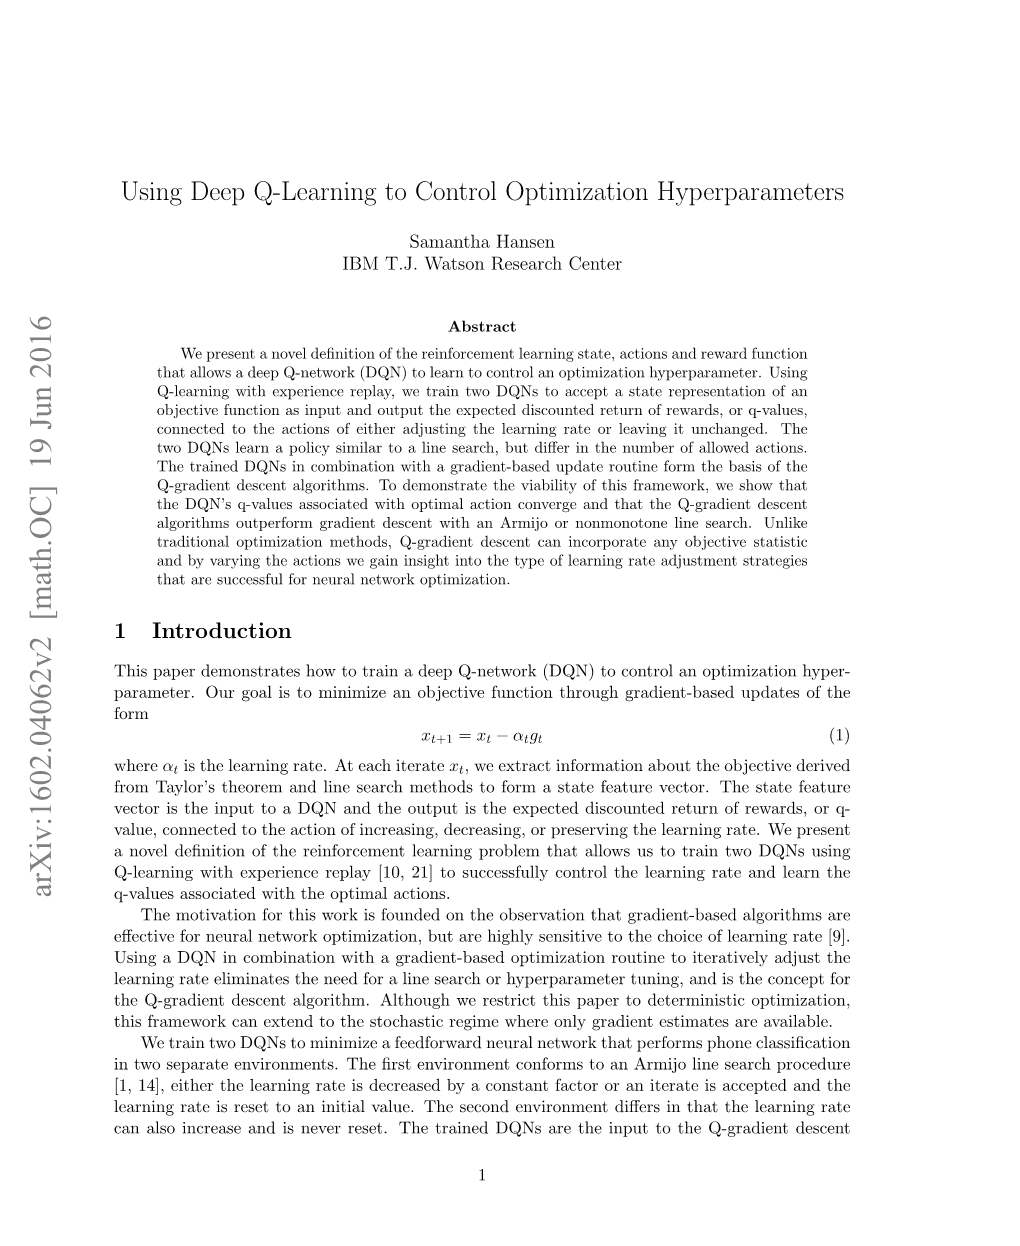 Using Deep Q-Learning to Control Optimization Hyperparameters